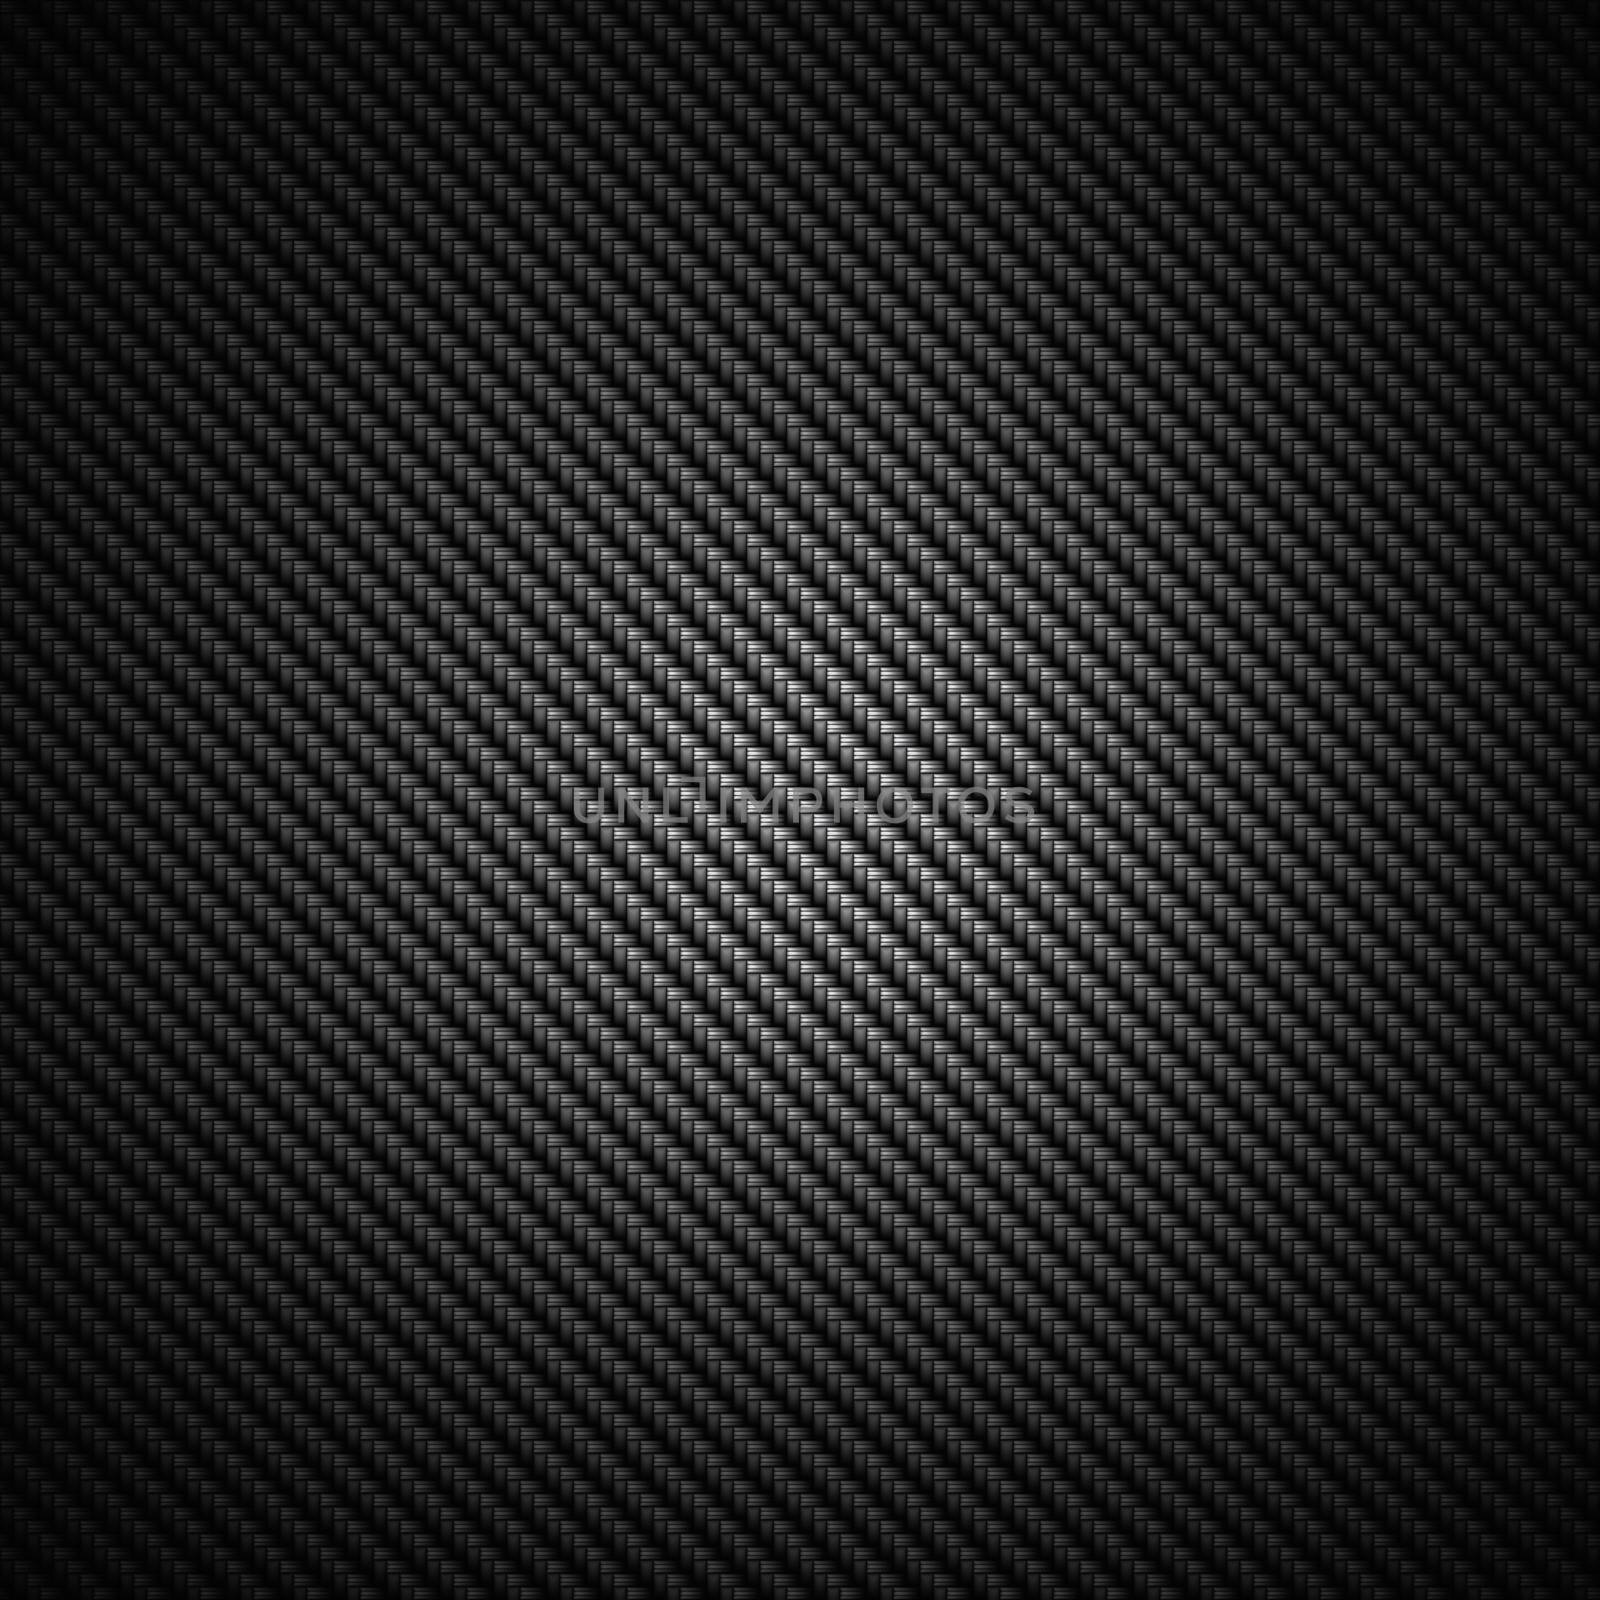 A realistic dark carbon fiber weave background or texture